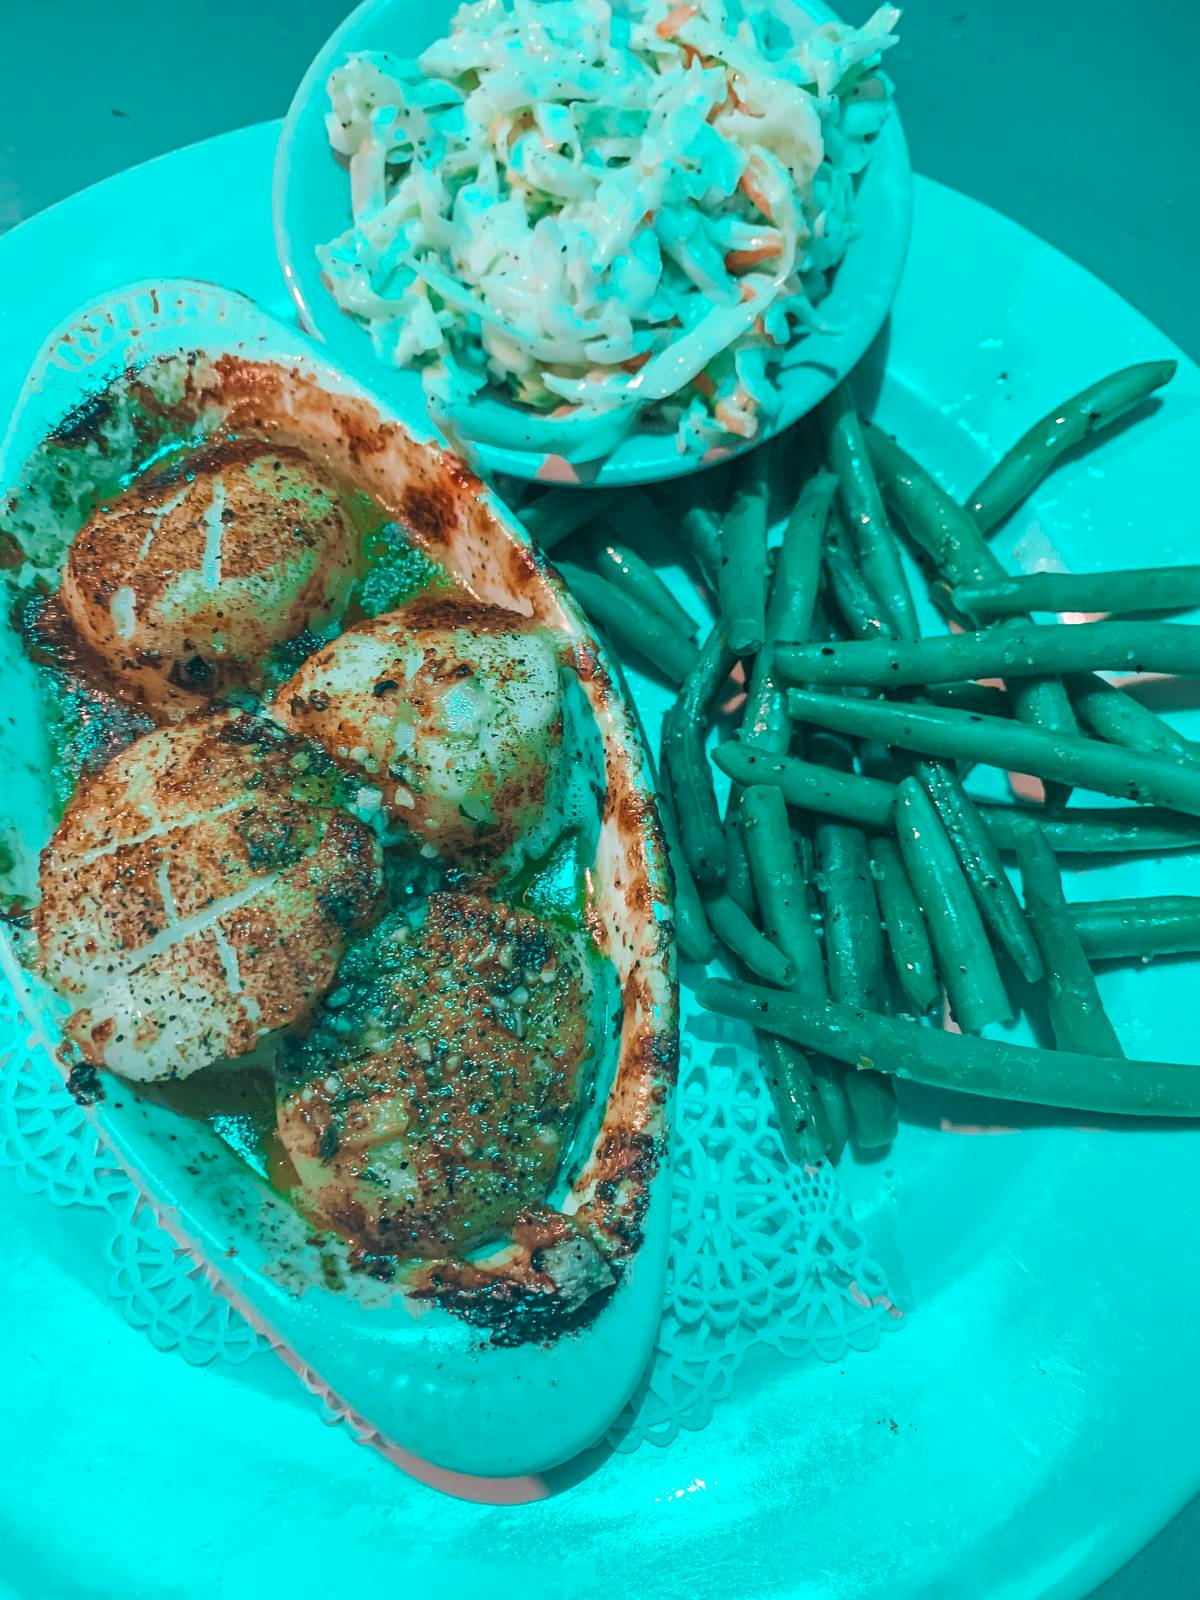 Blackened scallops from Brass Monkey in Pass-A-Grille